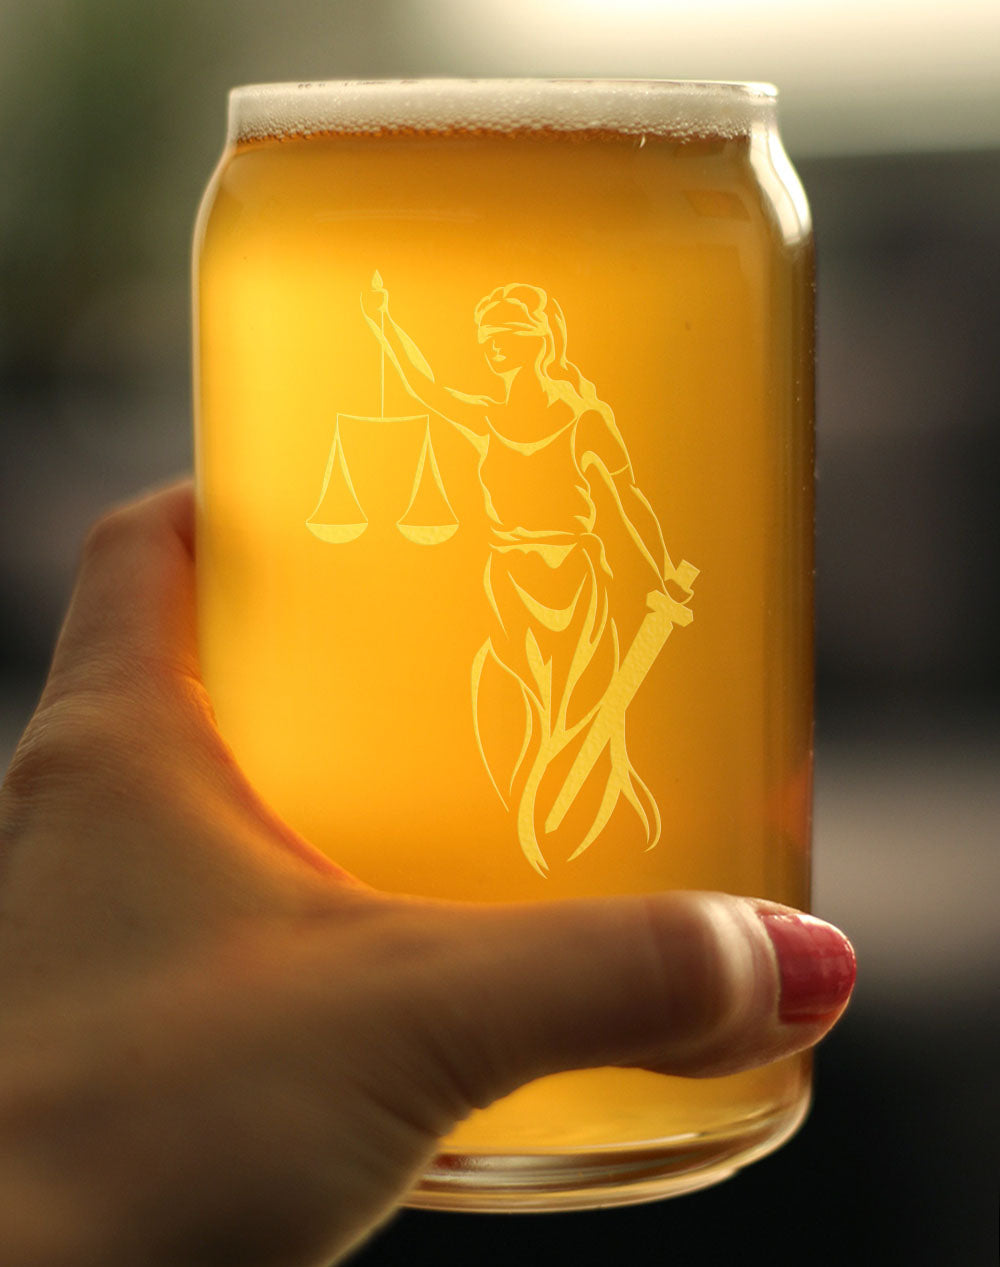 Lady Justice Beer Can Pint Glass - Lawyers and Attorneys Themed Gifts or Party Décor for Women and Men - 16 oz Glasses